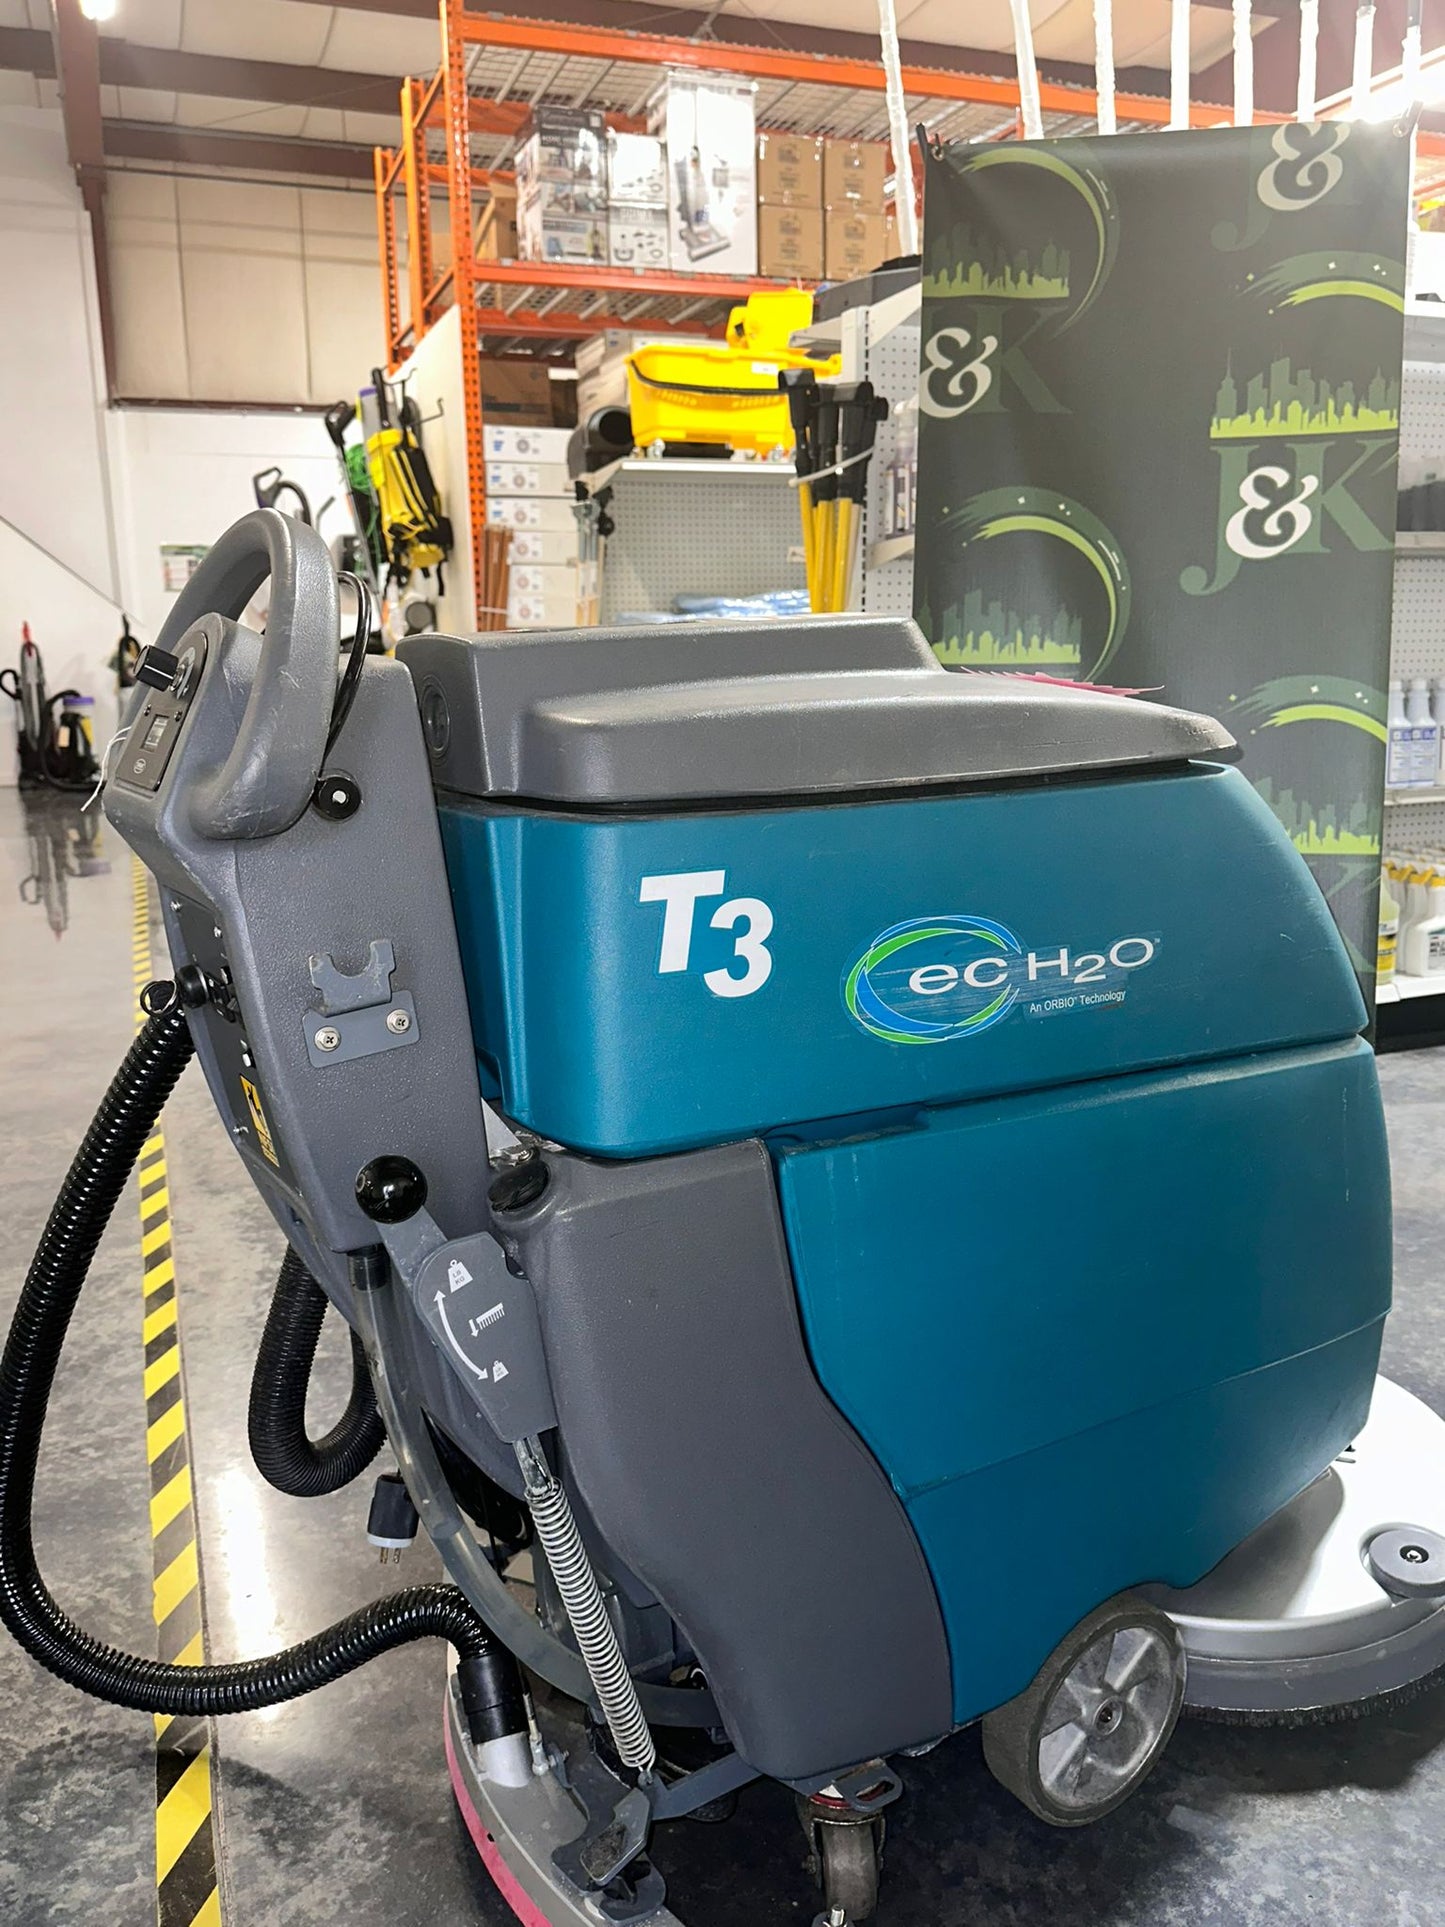 Tennant 3 ECO H20 Scrubber - 20", Pad Assist (REFURBISHED)